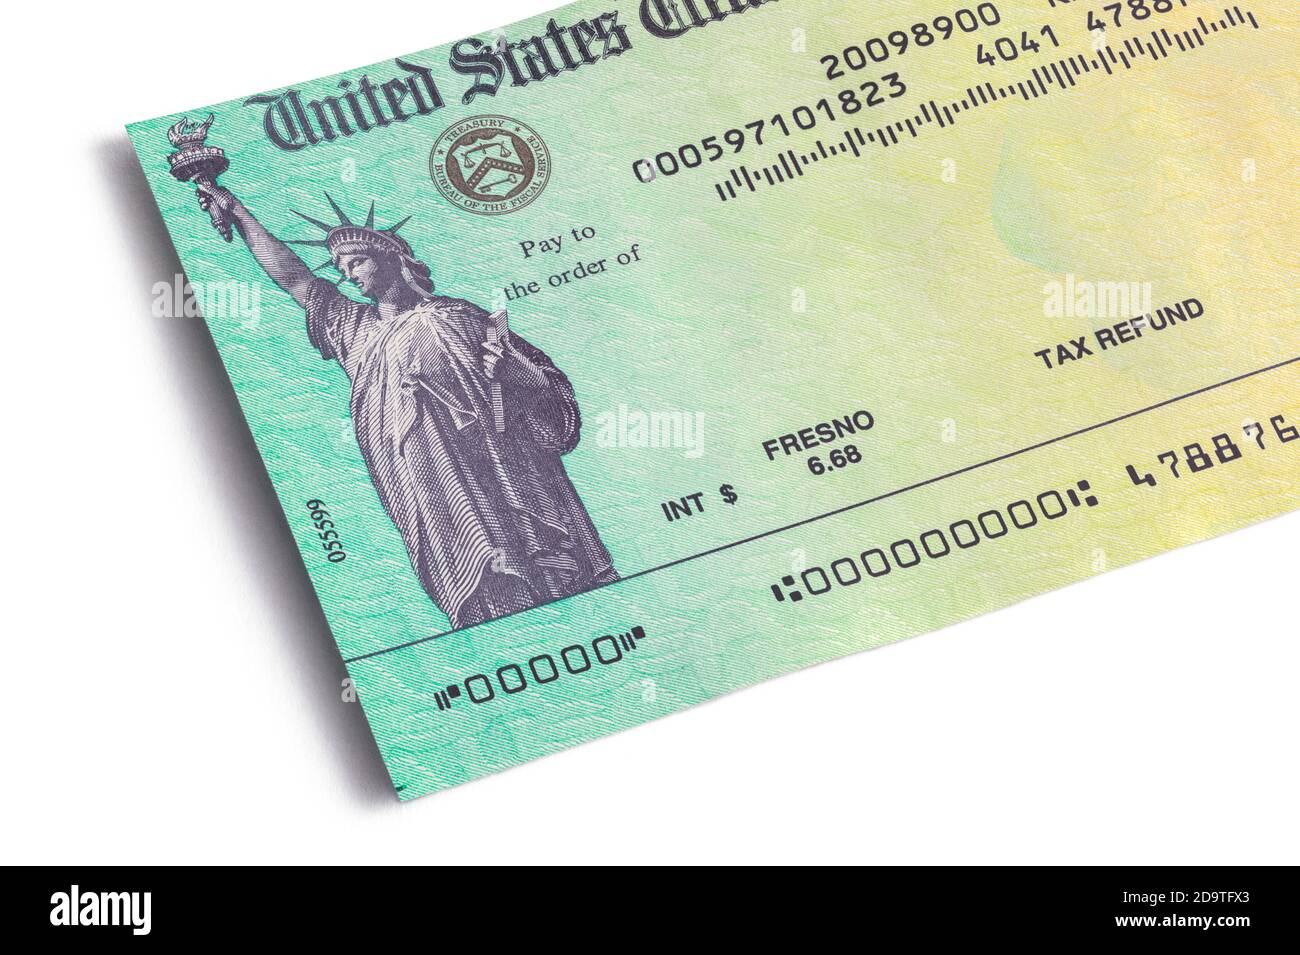 federal-tax-refund-check-close-up-cut-out-on-white-stock-photo-alamy